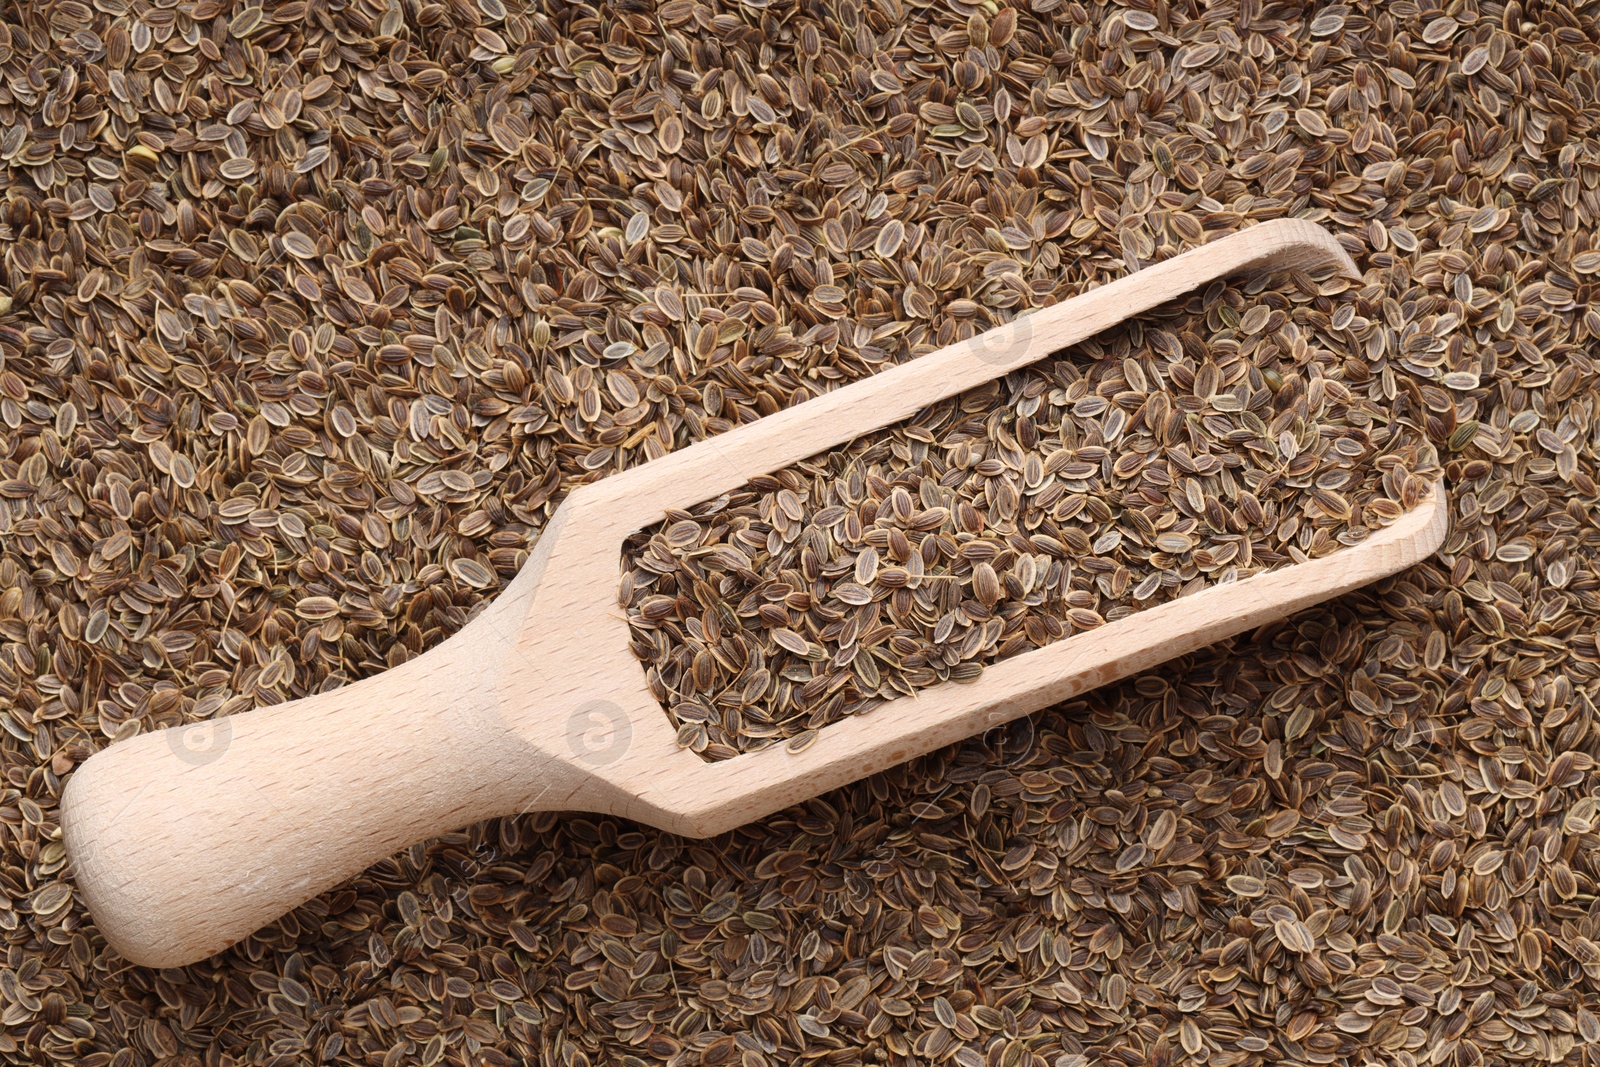 Photo of Dry dill seeds and wooden scoop, top view